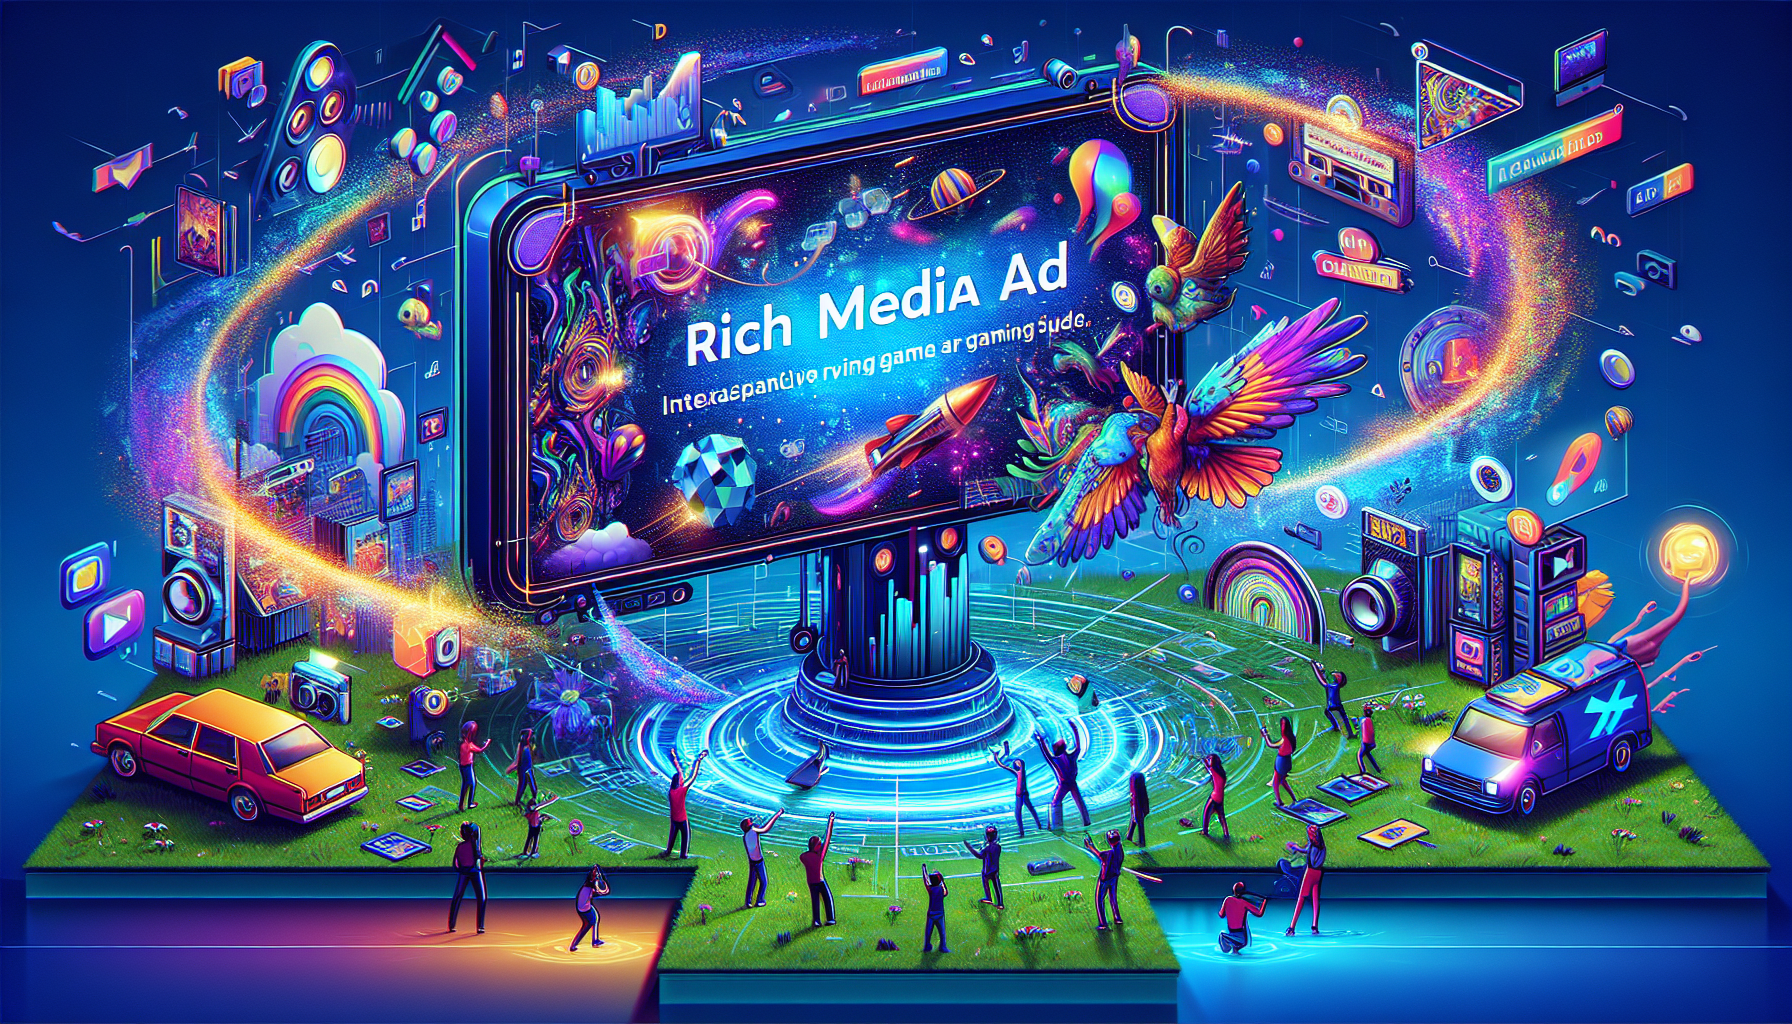 Illustration of a rich media ad providing an immersive gaming experience